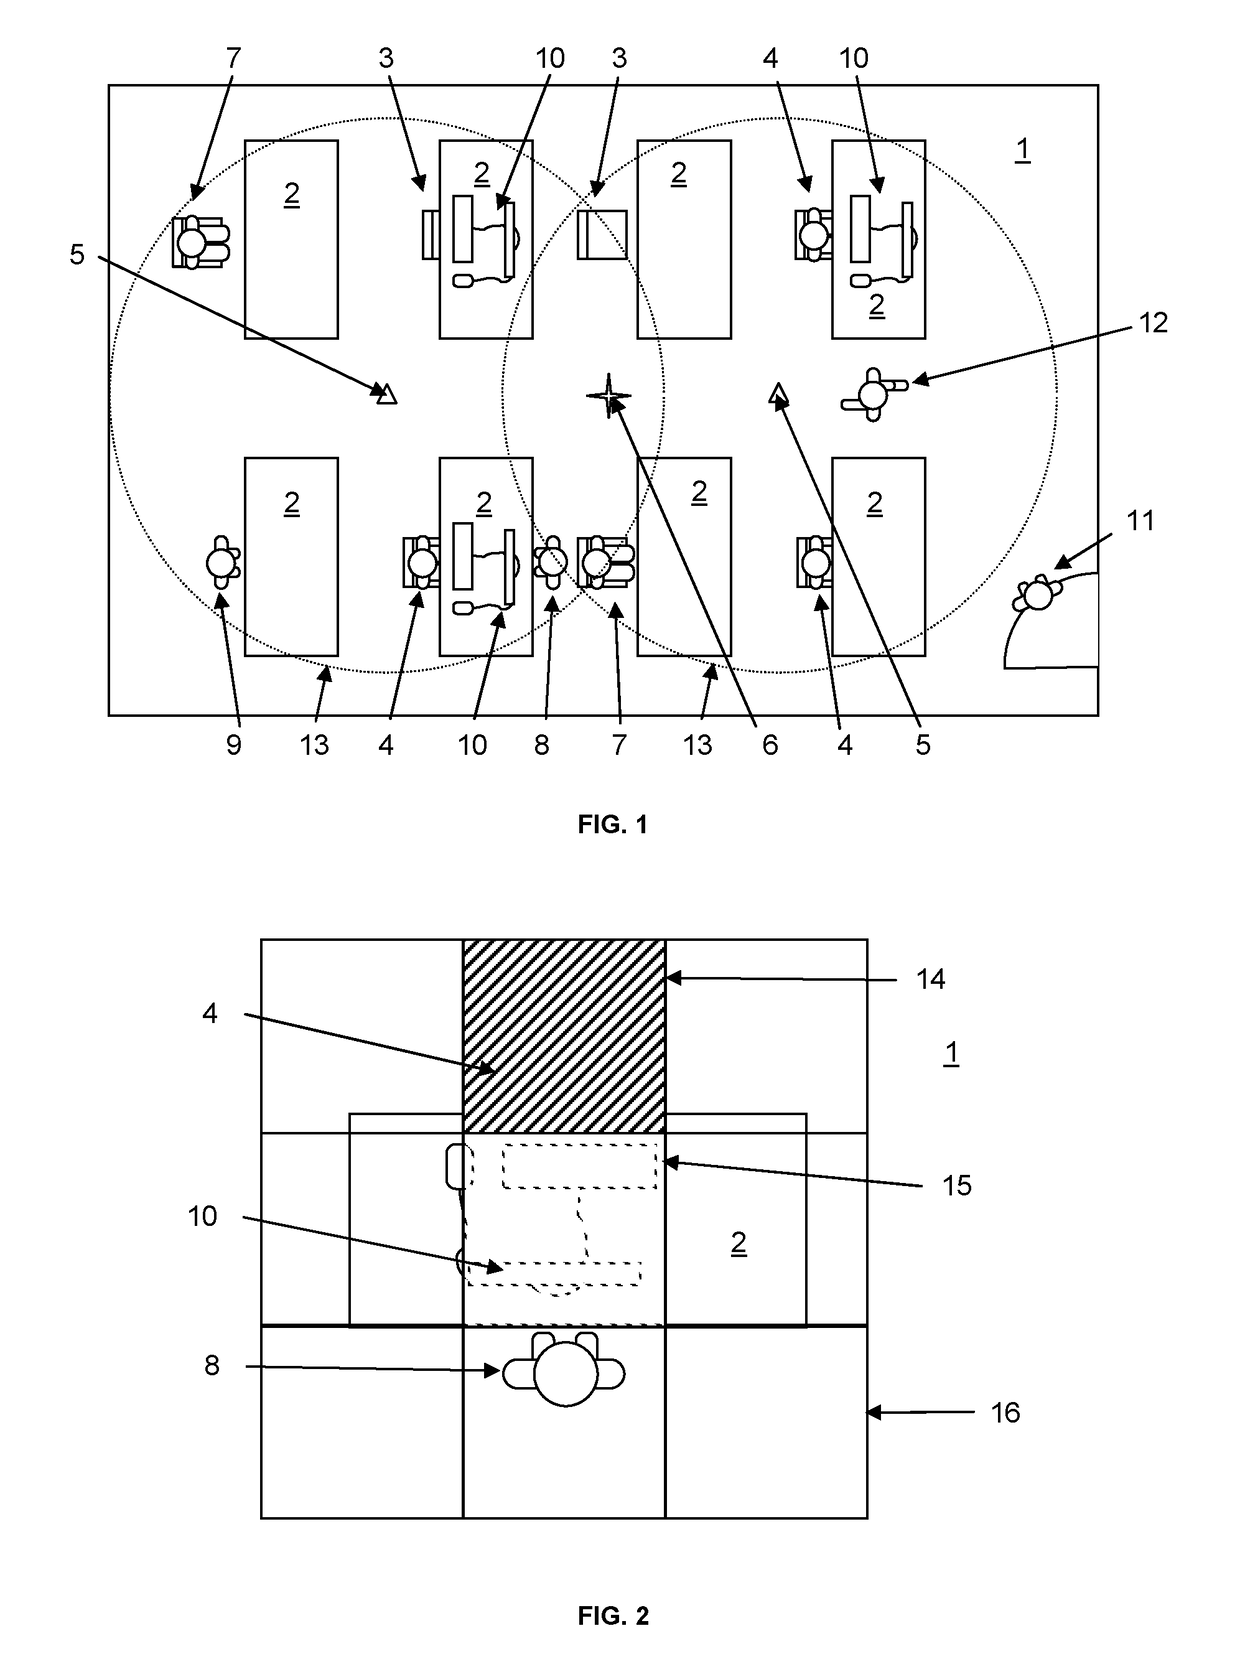 Apparatus arranged with plural diverse-type detectors for controlling an electrical load